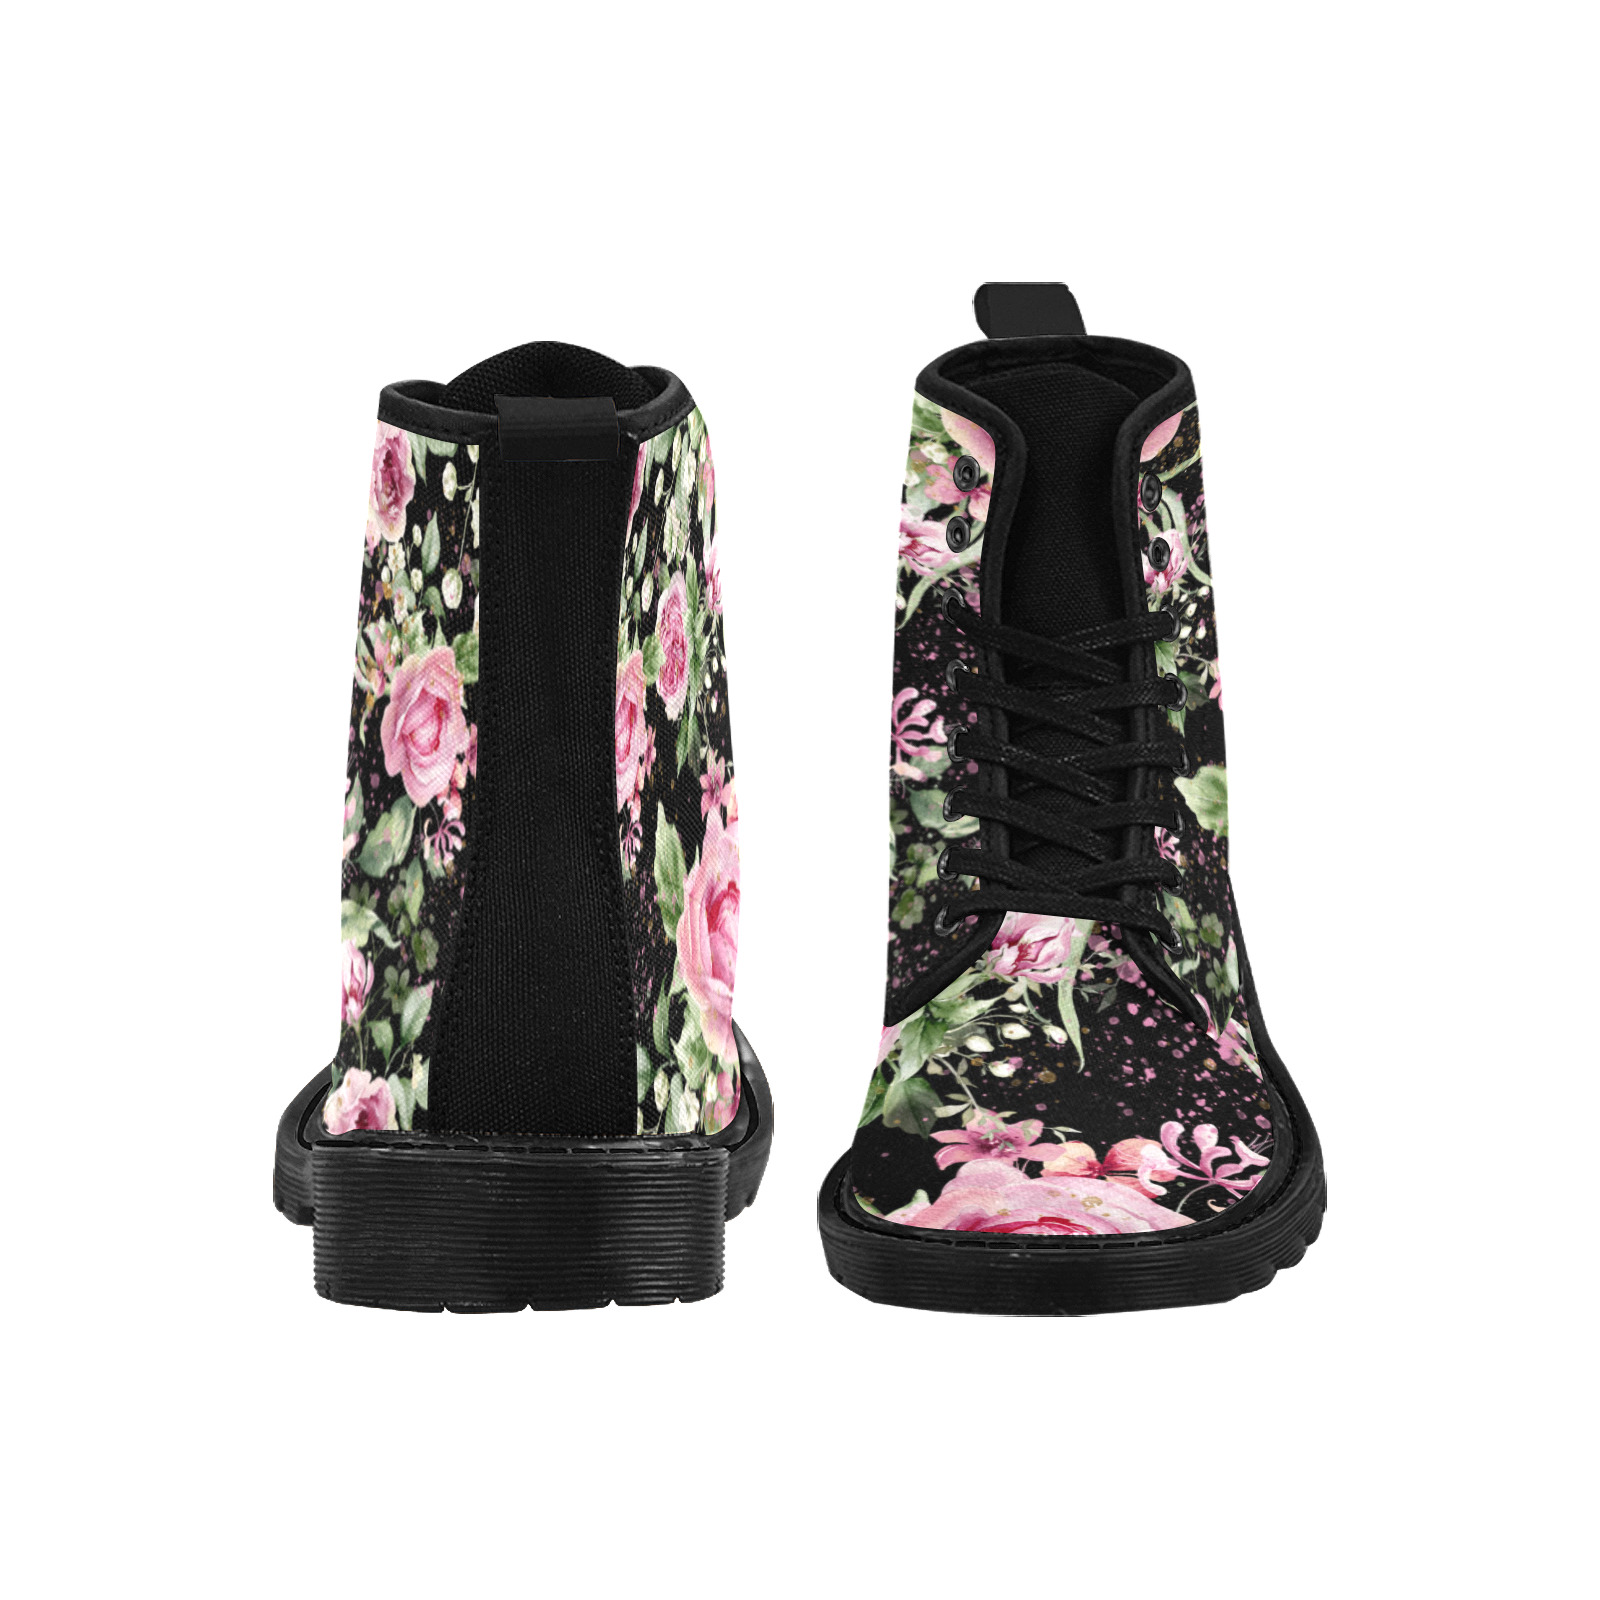 My stylish roses boots Martin Boots for Women (Black) (Model 1203H)